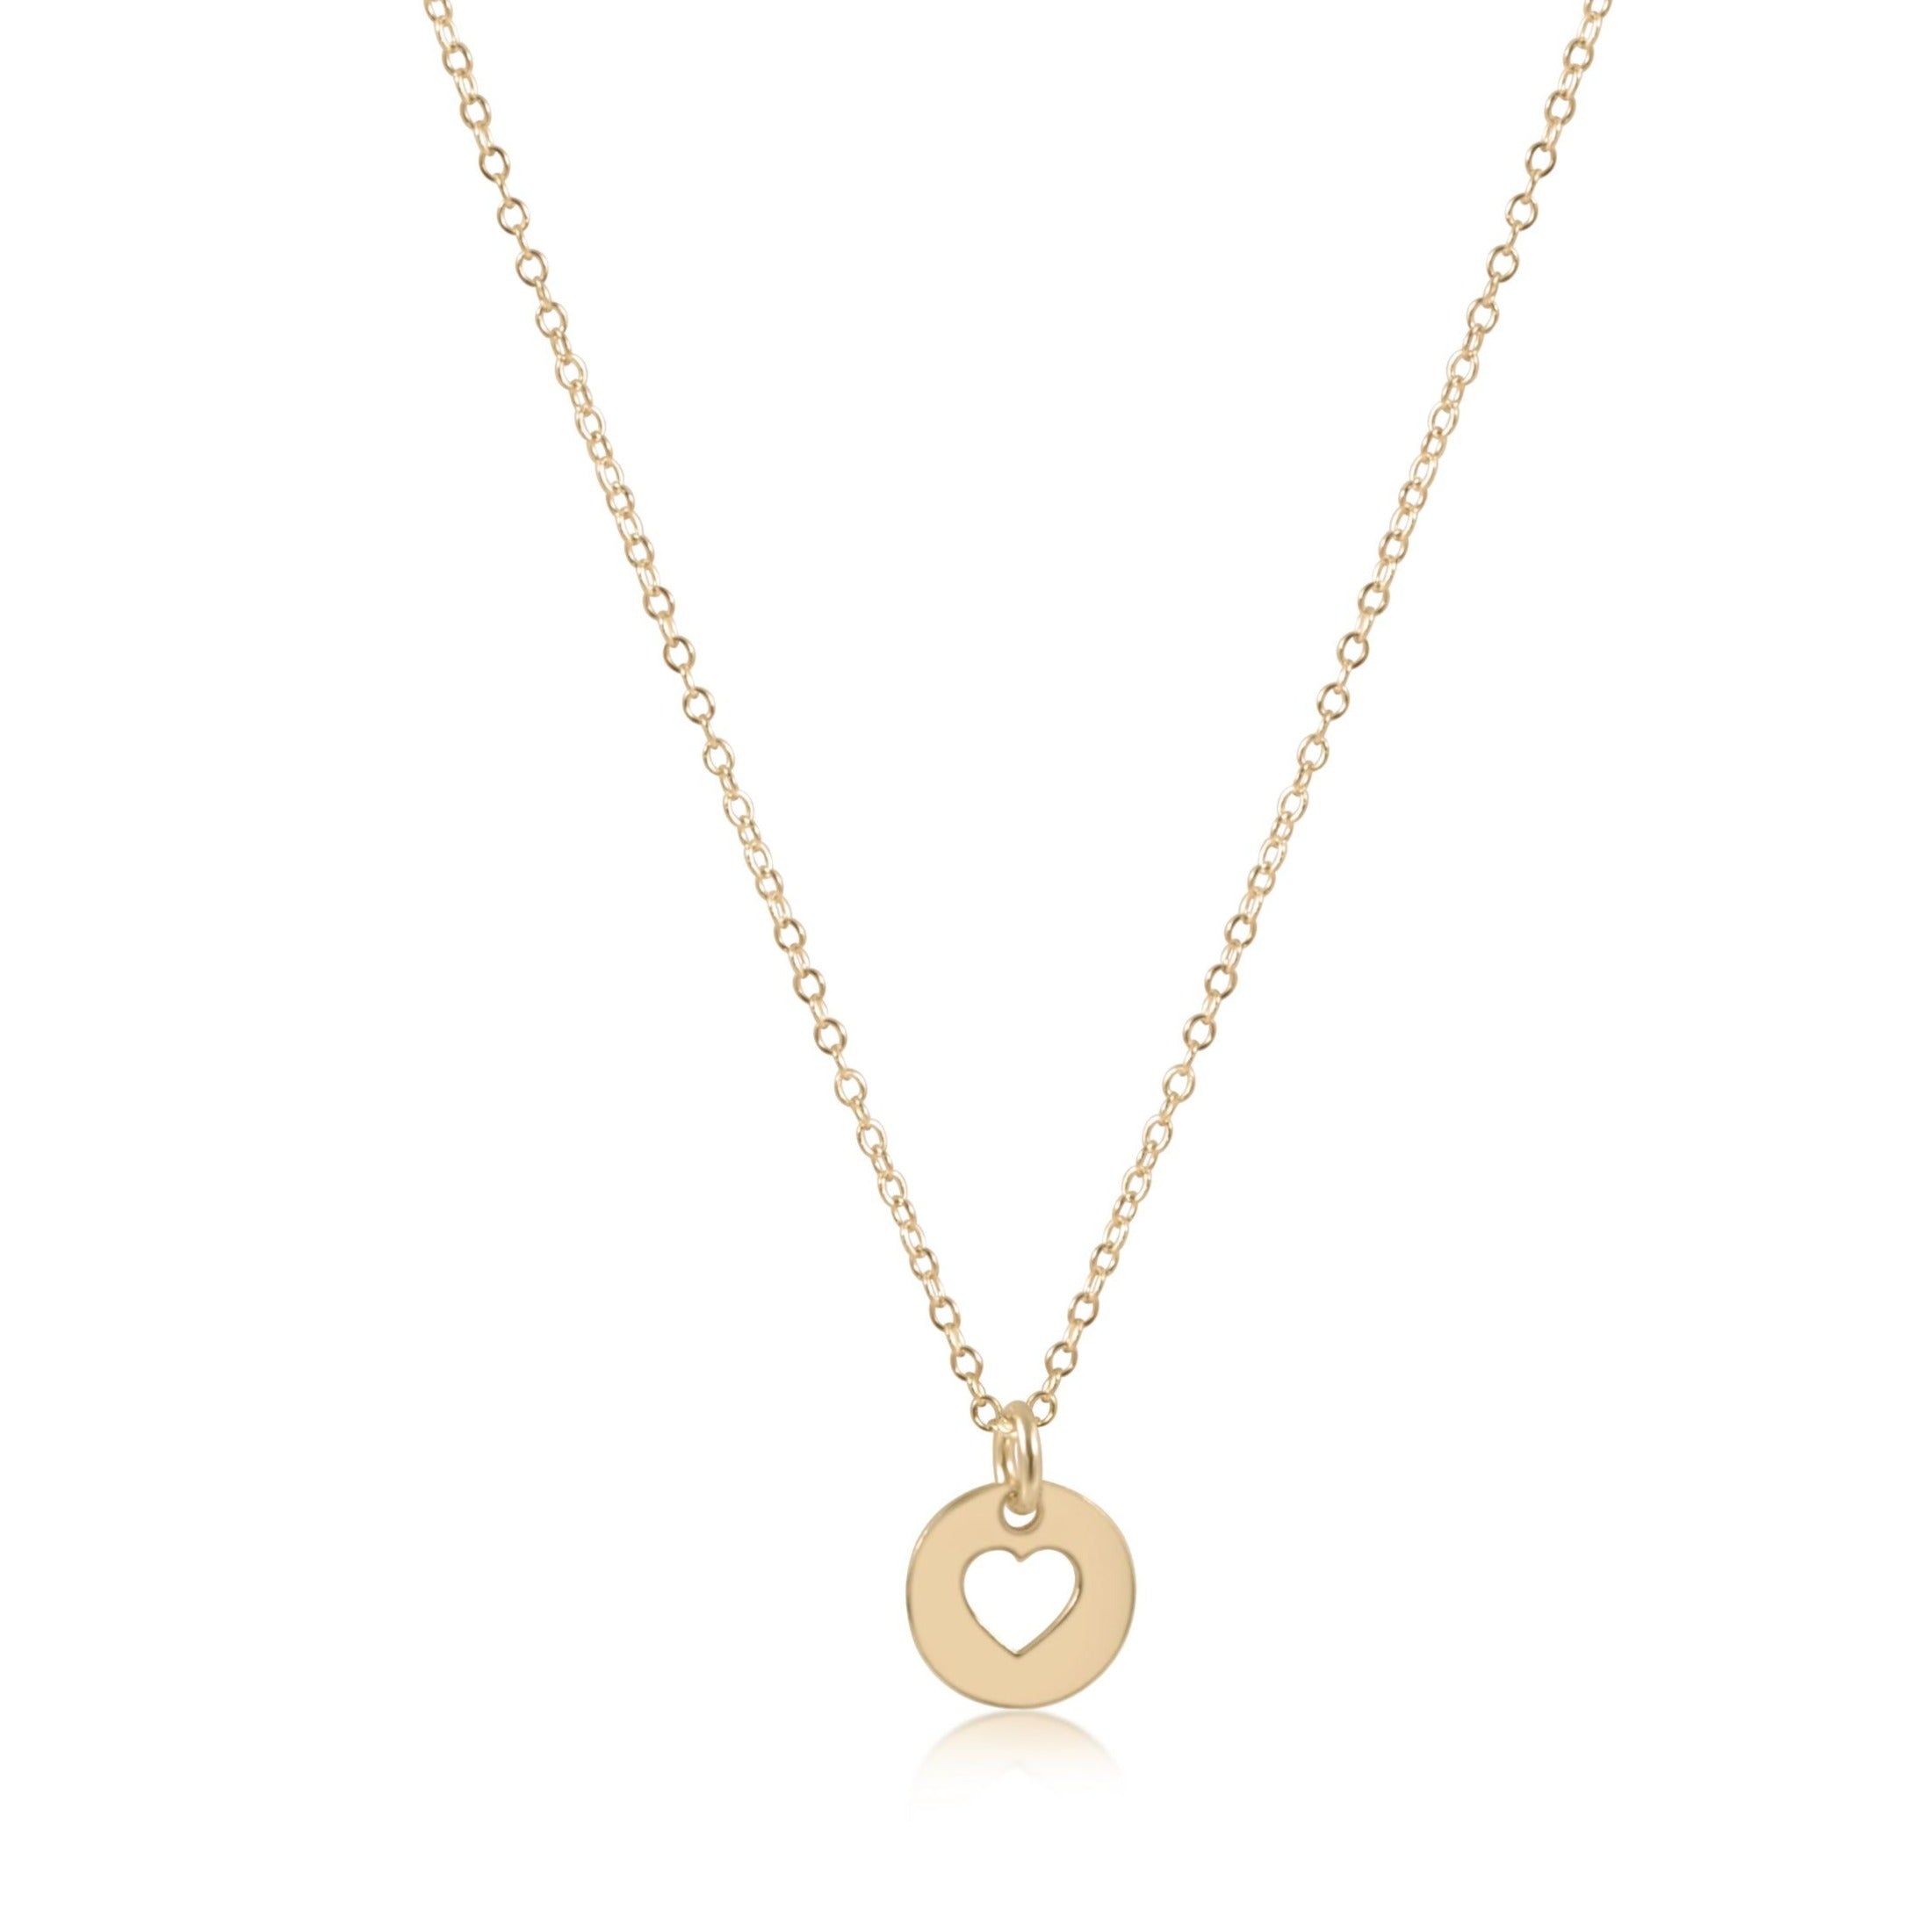 Gold Five Disc Necklace with a Satin Finish - The Makery Collection